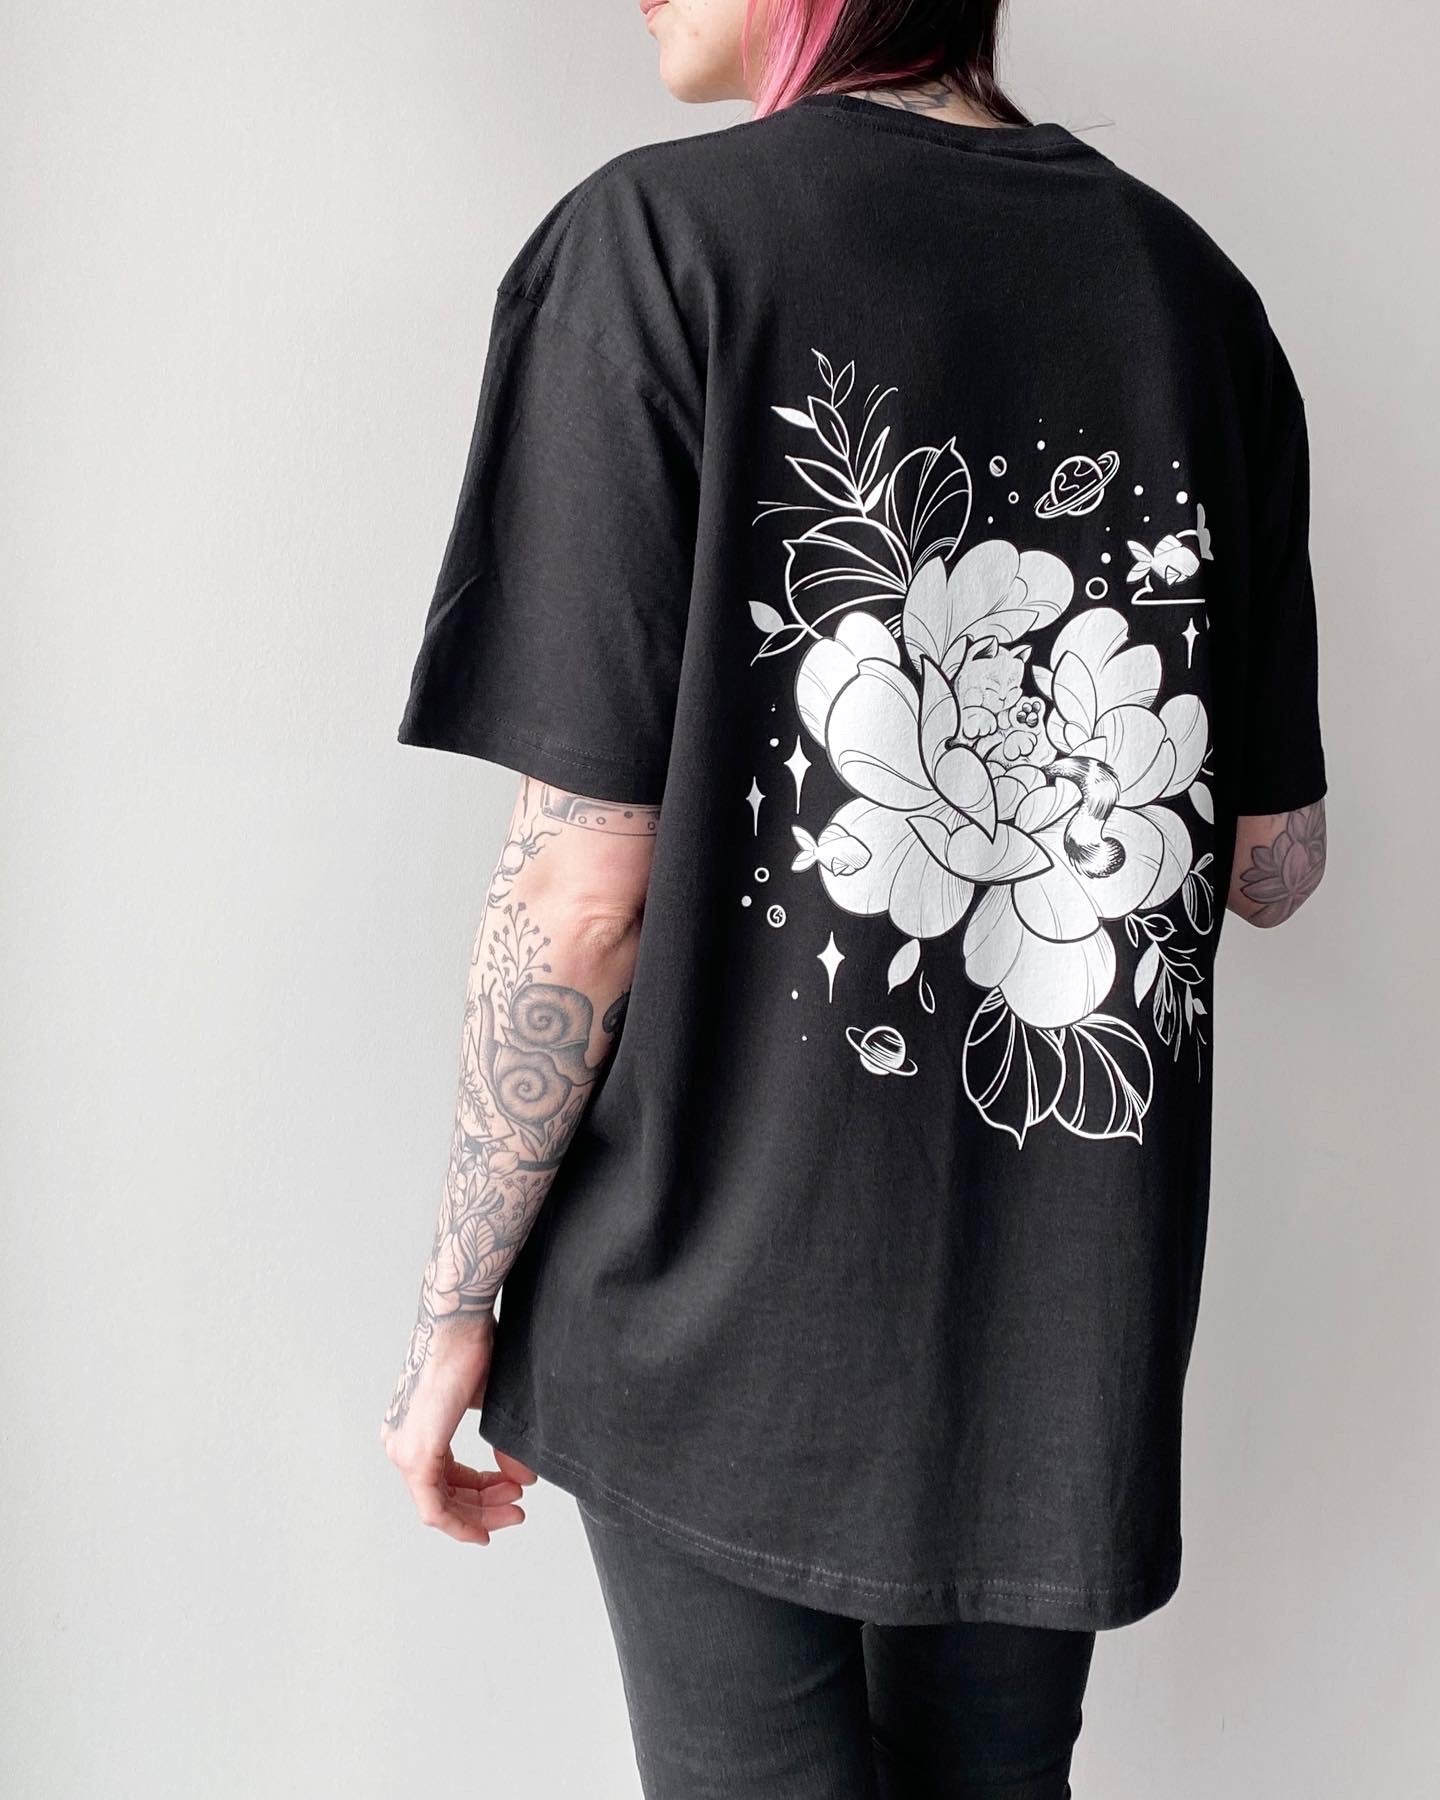 Always dreaming cat and flower tshirt design in black line work and shading, illustrated by female floral tattoo artist Lu Loram Martin, Toronto, Canada